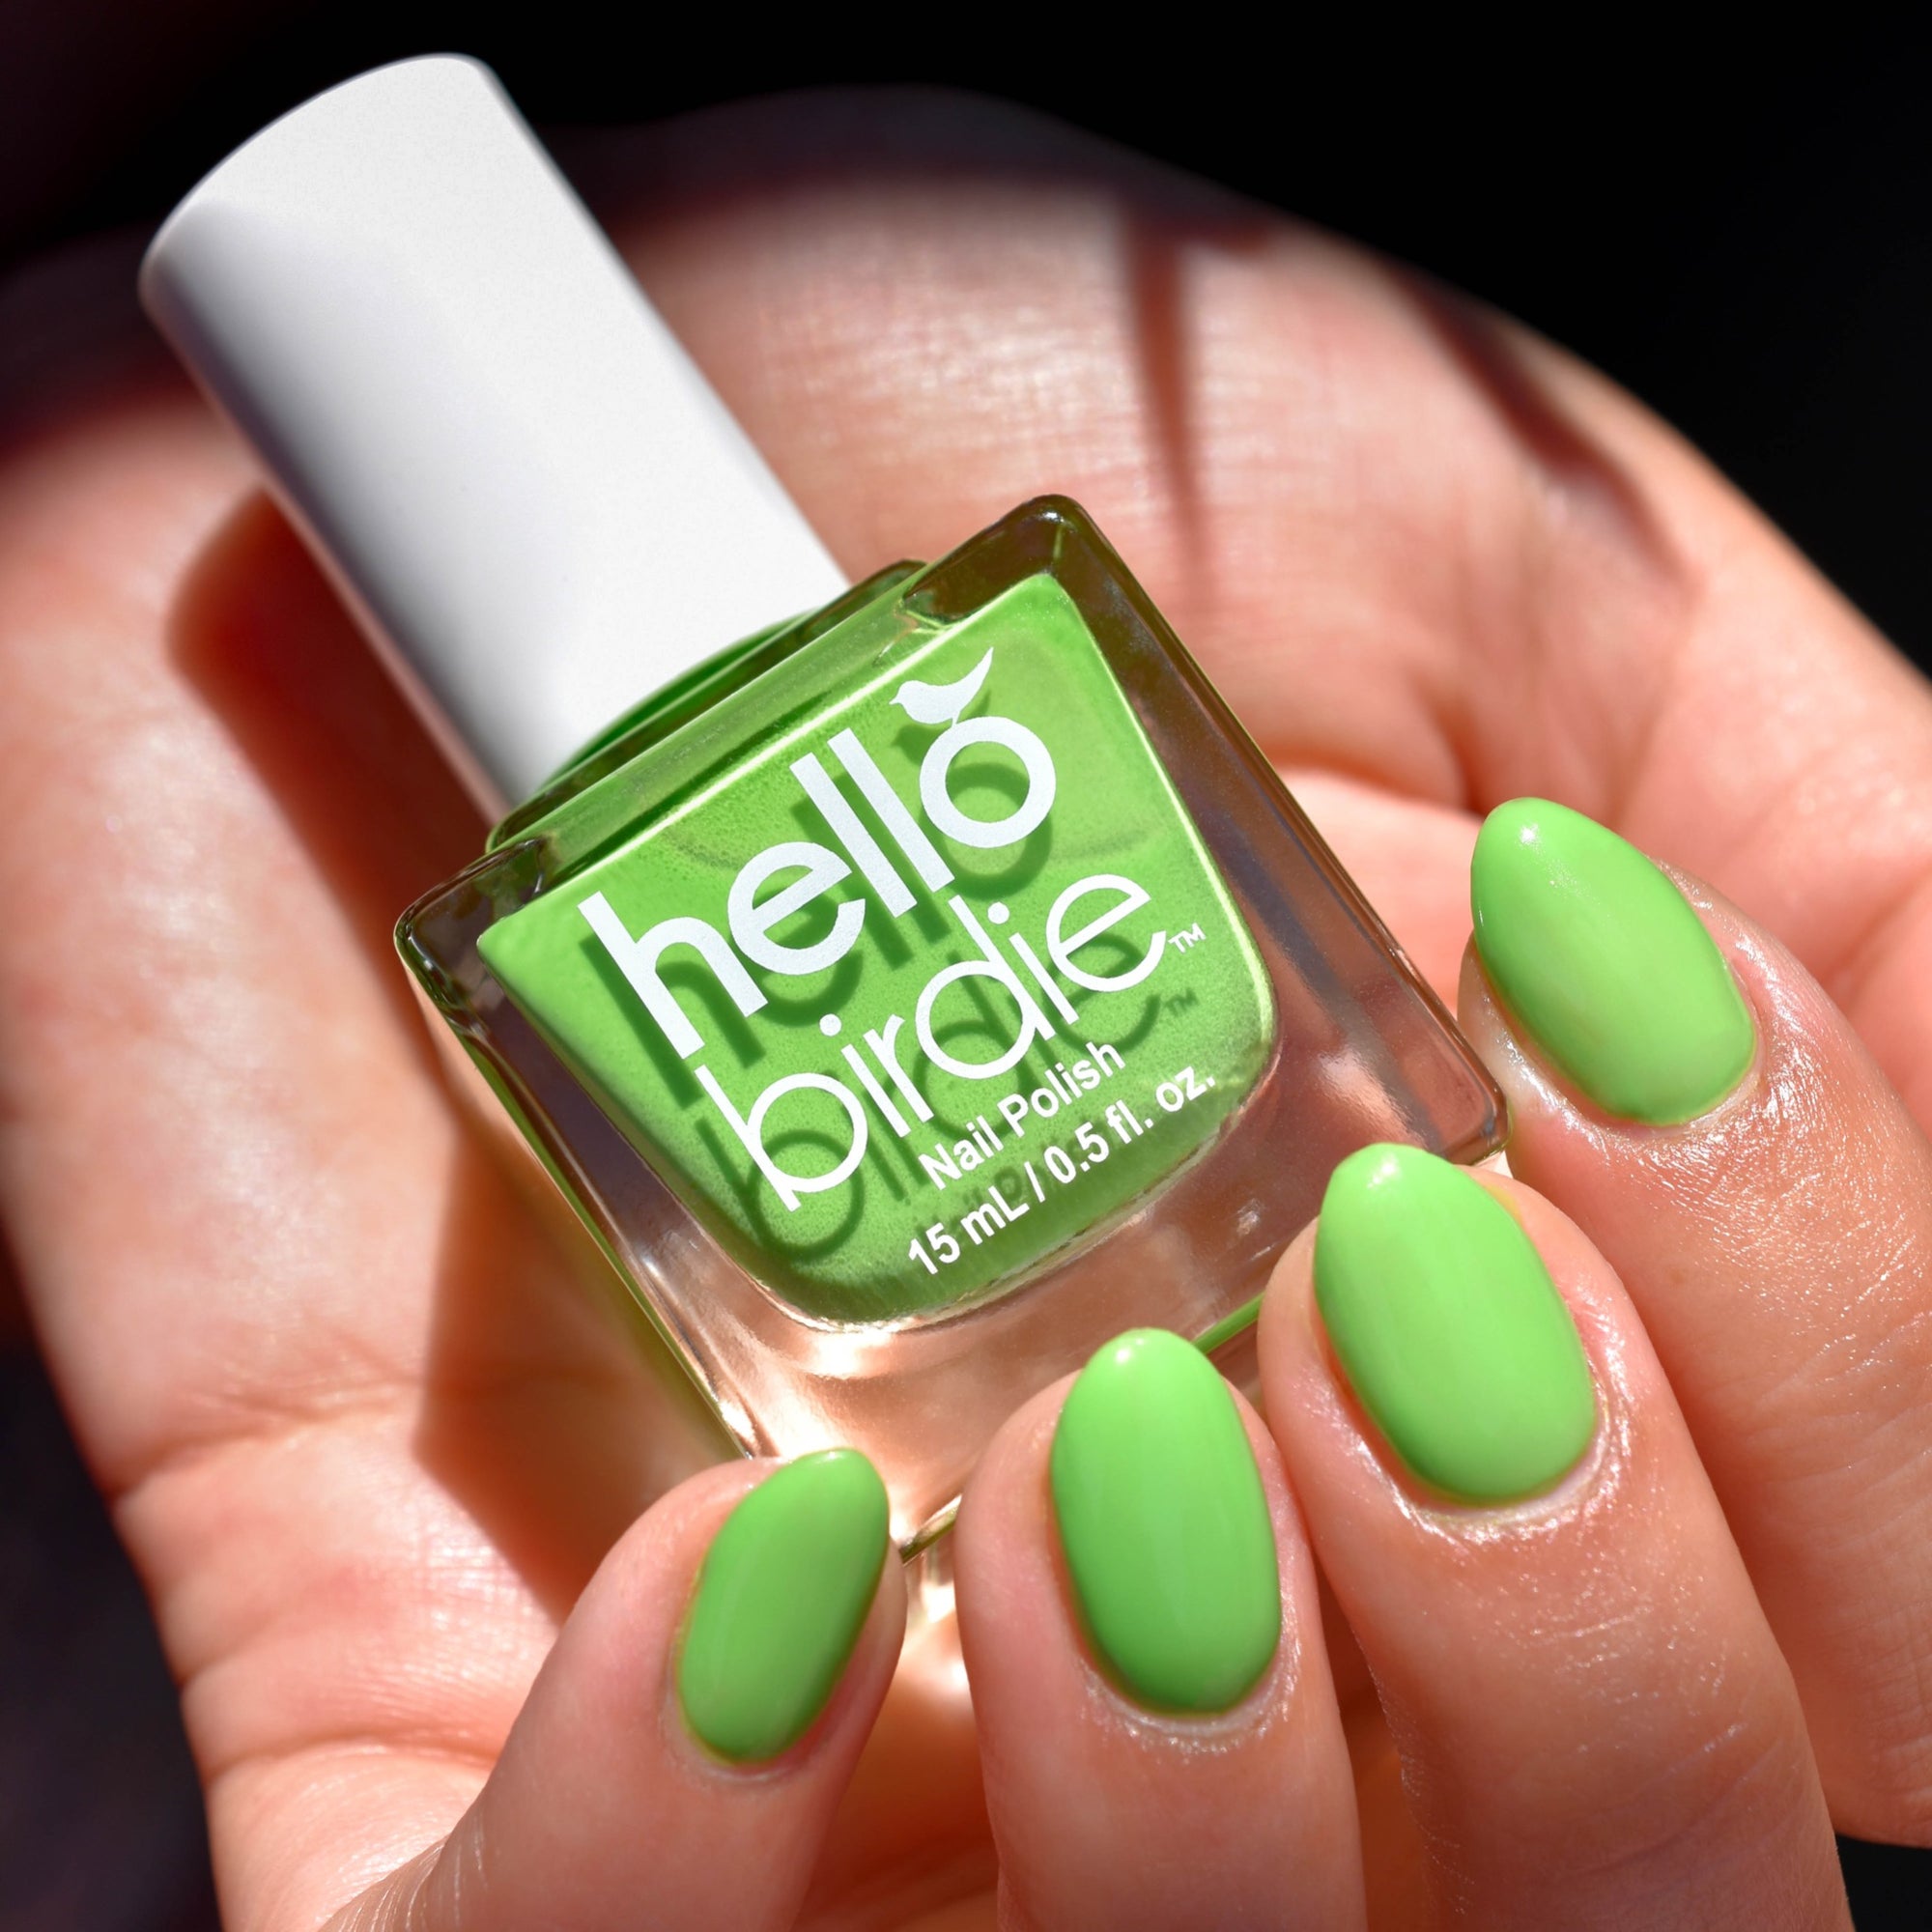 A close up of a mid toned hand clutching a bottle of Kiwi Nail Polish from Hello Birdie which is a lime green.  The nails of the hand are painted with the same color and the polish bottle has a cube shape and a white cap with white text. Dramatic sunlight highlights the hand with a leaf shadow over the palm and dark background.